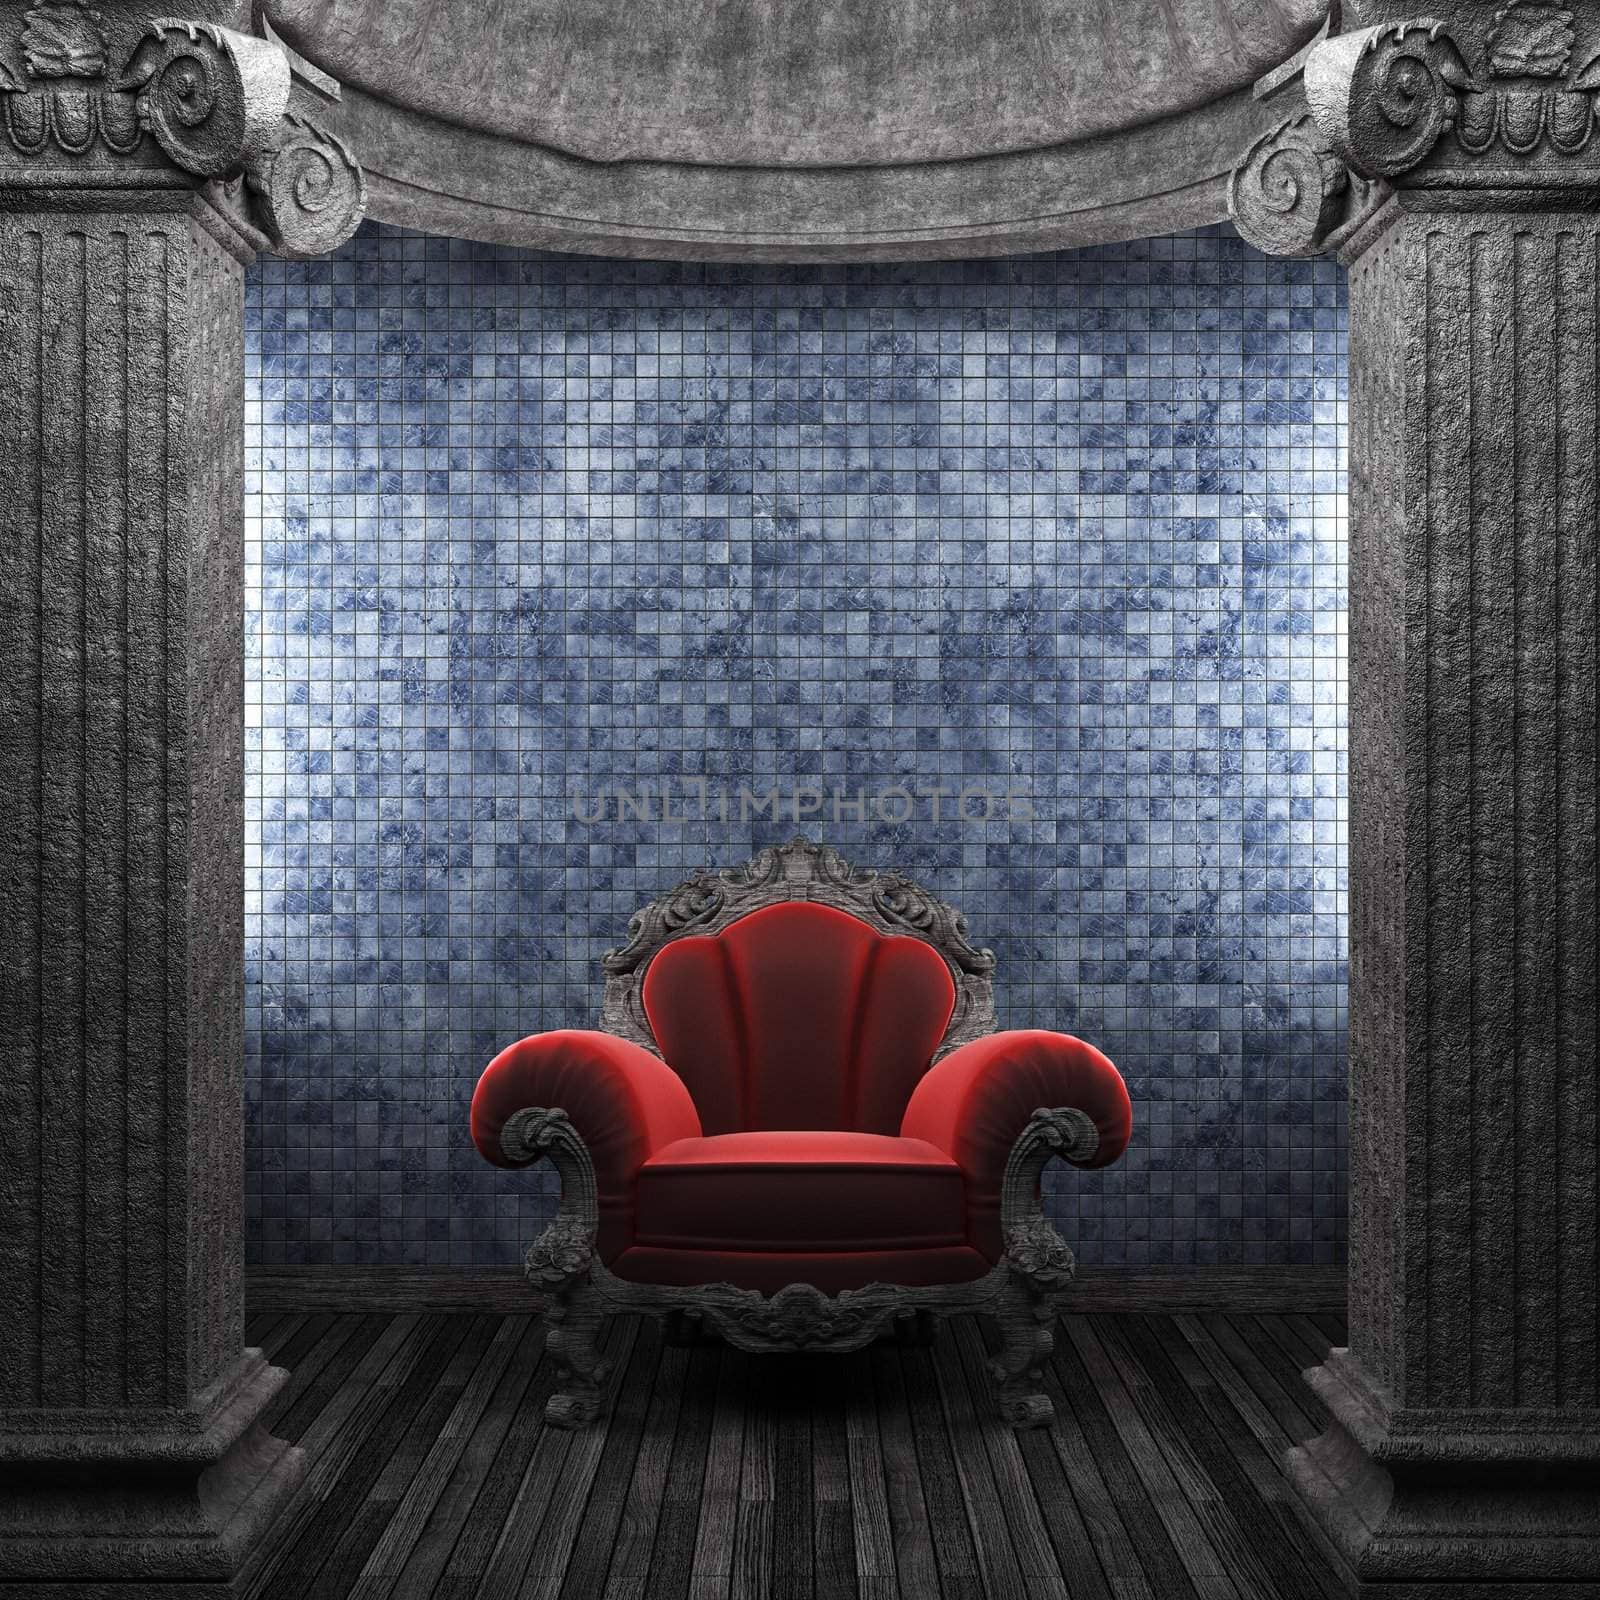 stone columns, chair and tile wall by icetray